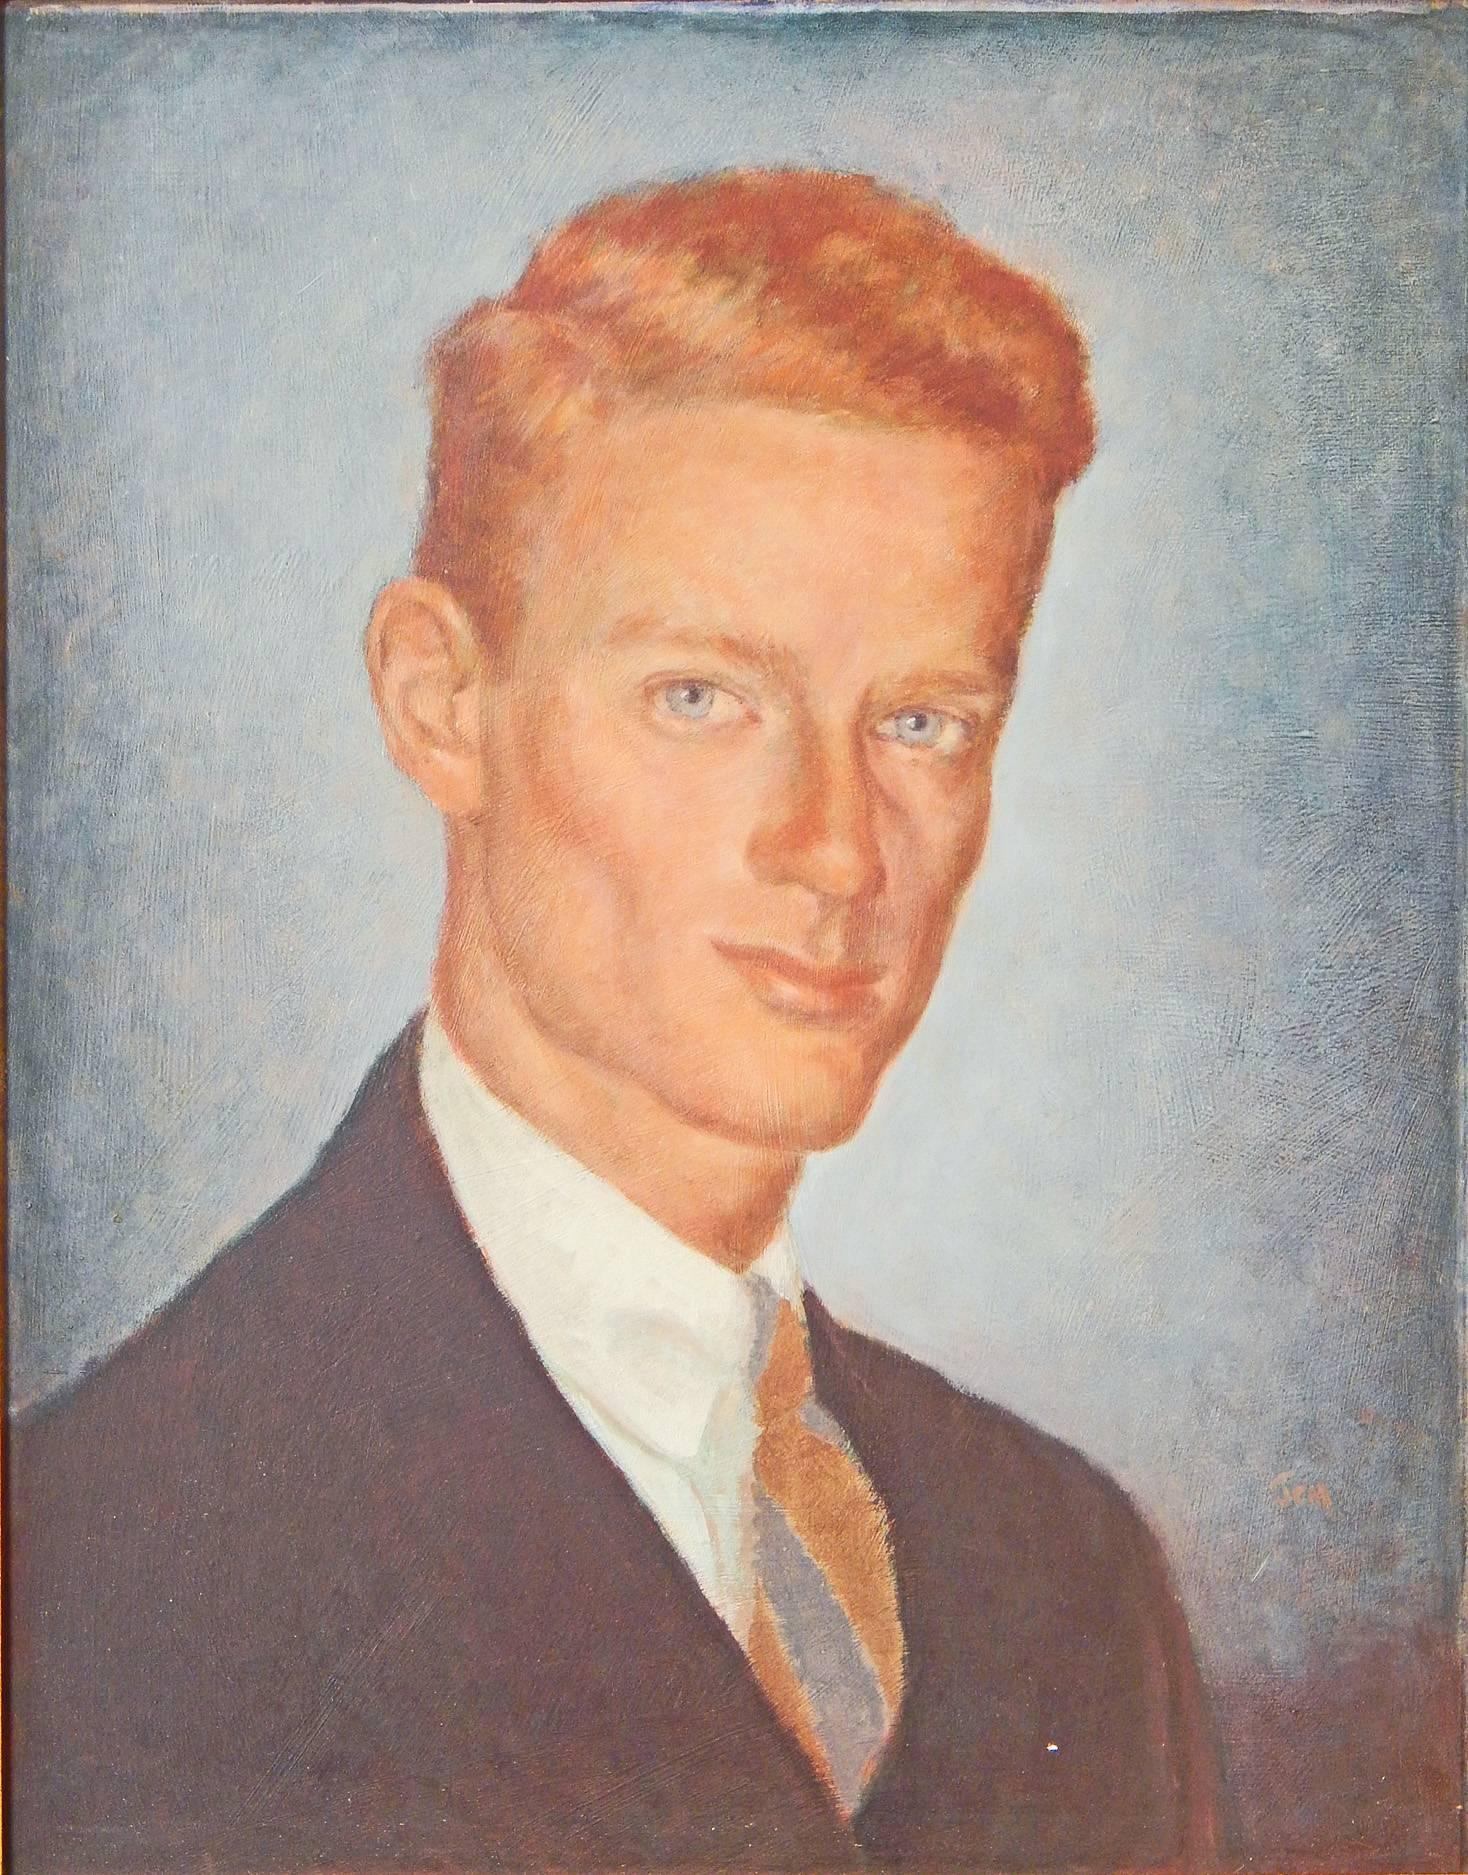 This portrait of a young man with vivid red hair, blue eyes and a ruddy complexion was painted by John C. Menihan, one of the most renowned portraitists and watercolorists of his day. Except for short periods as a student at the University of